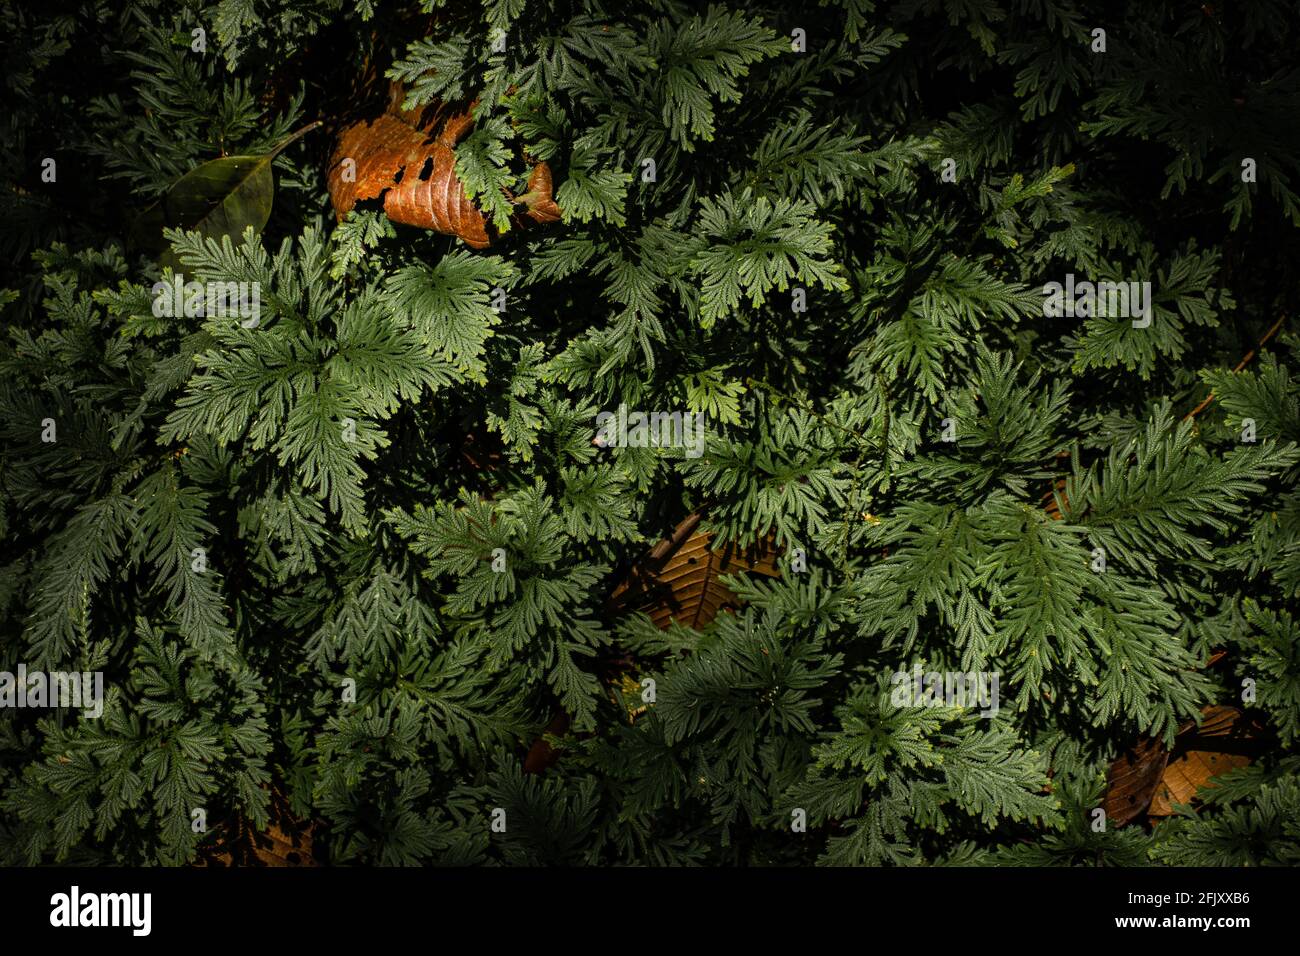 Amazon forests have large trees that provide oxygen to the world Stock Photo